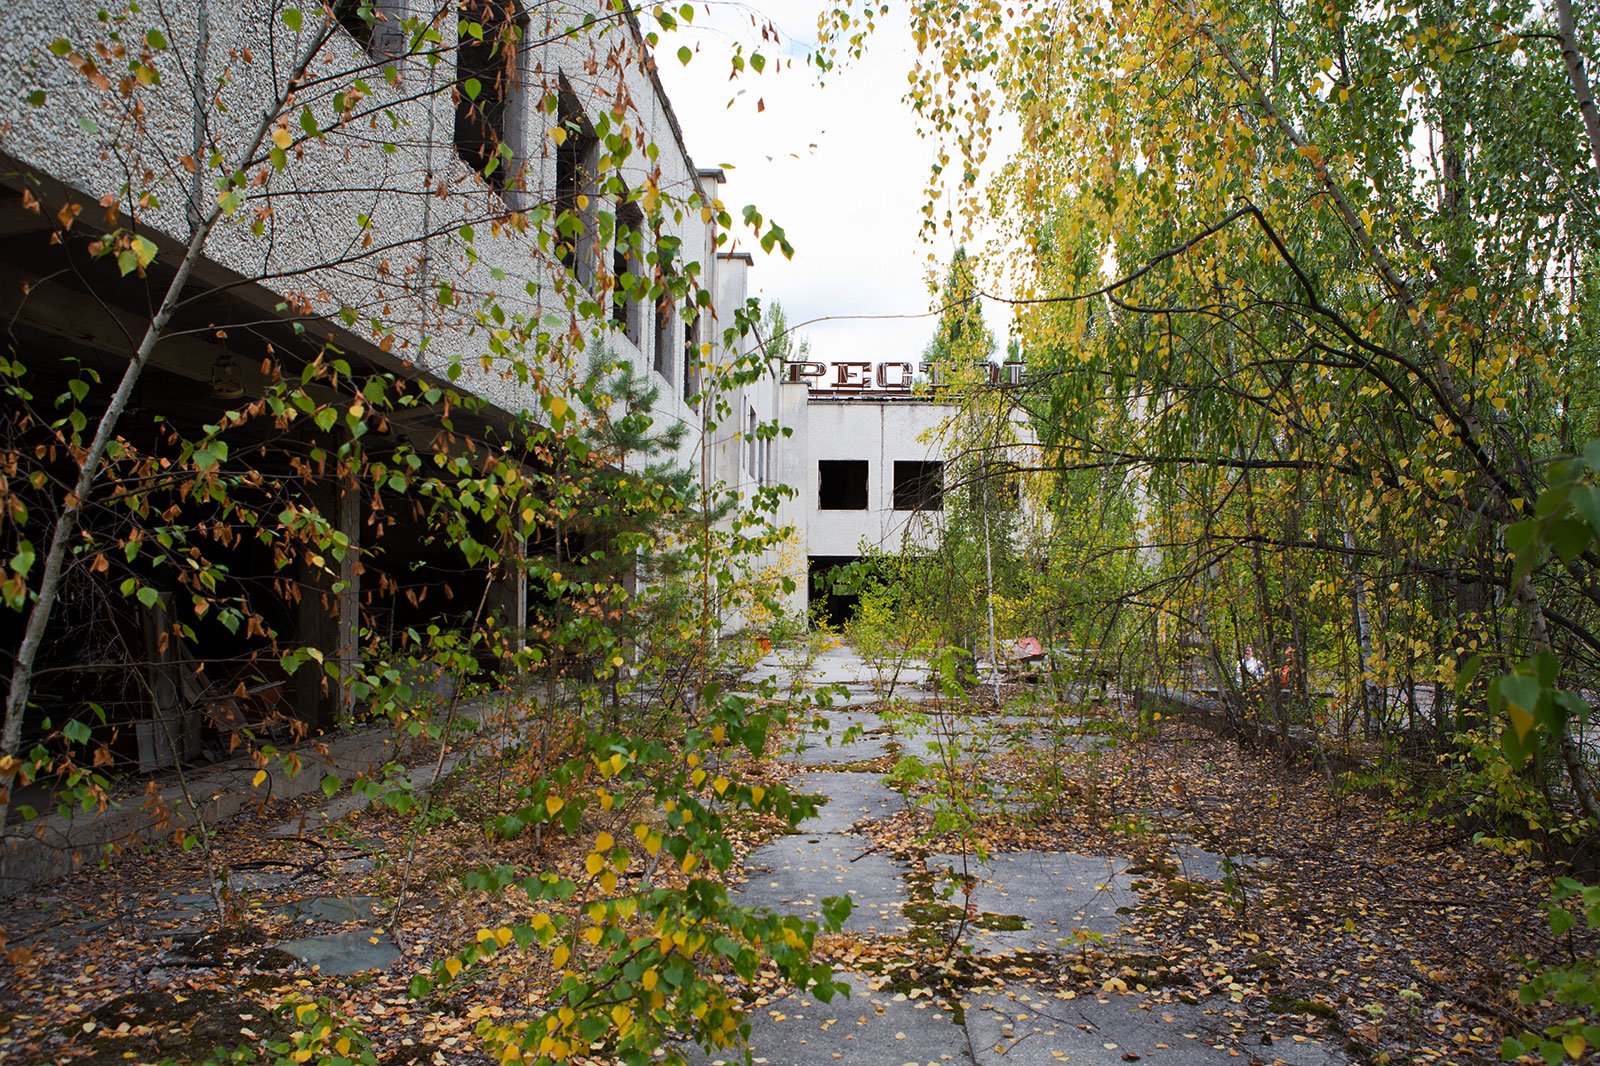 How to walk around the ghost town in Chernobyl